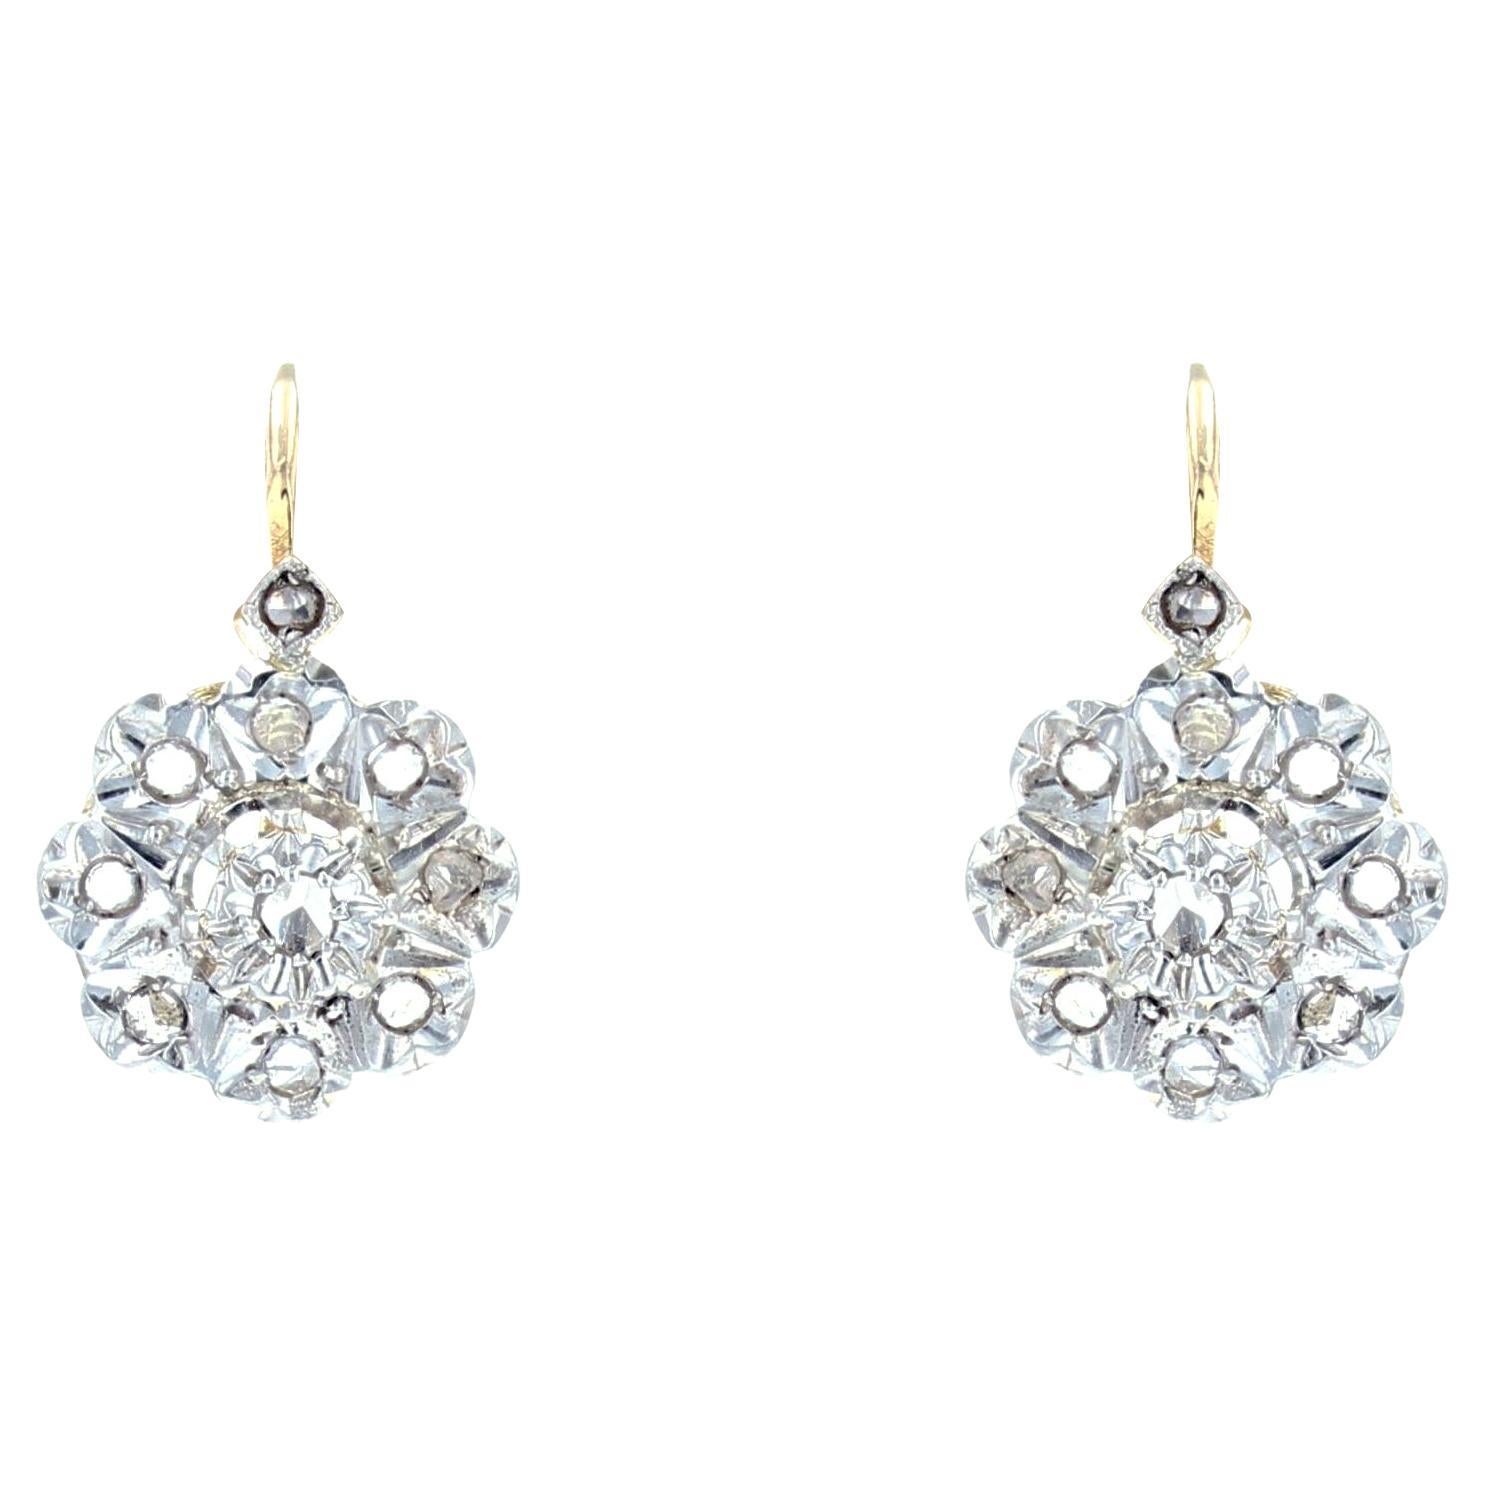 French, 20th Century Rose Cut Diamonds Daisy Shaped Lever Back Earrings